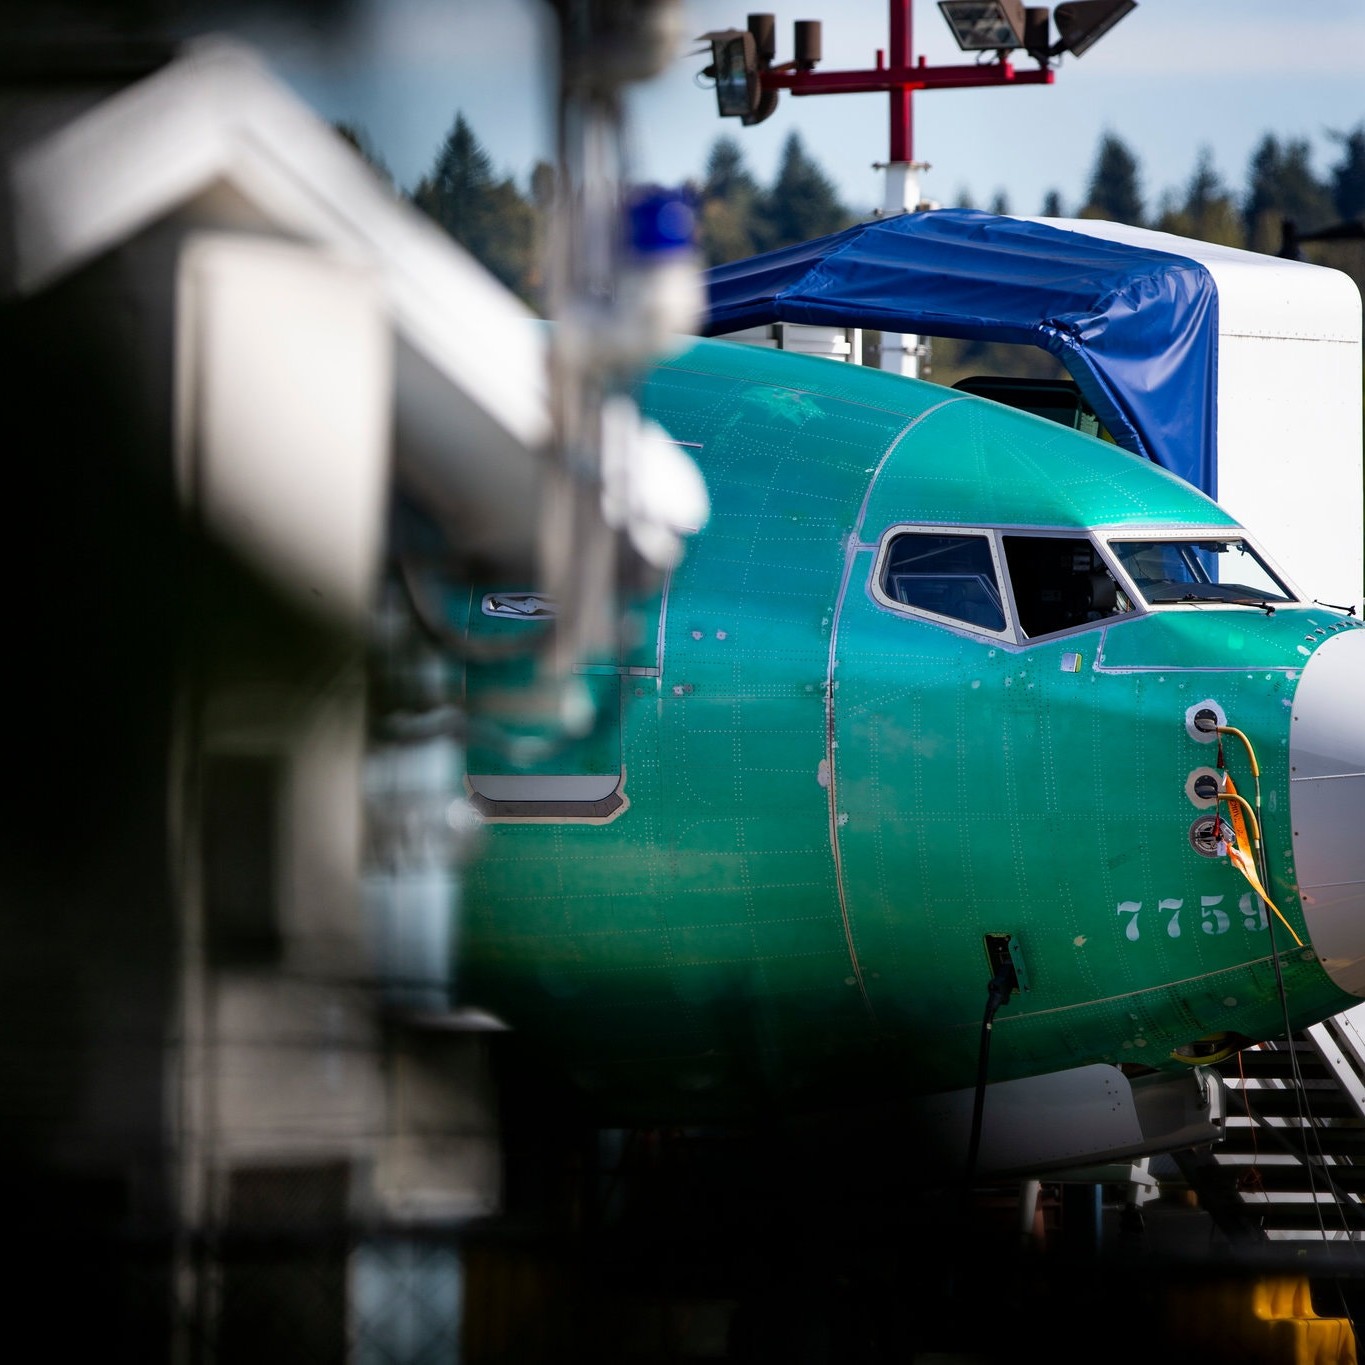 Boeing Employees Mocked FAA and Clowns Who Designed 737 Max